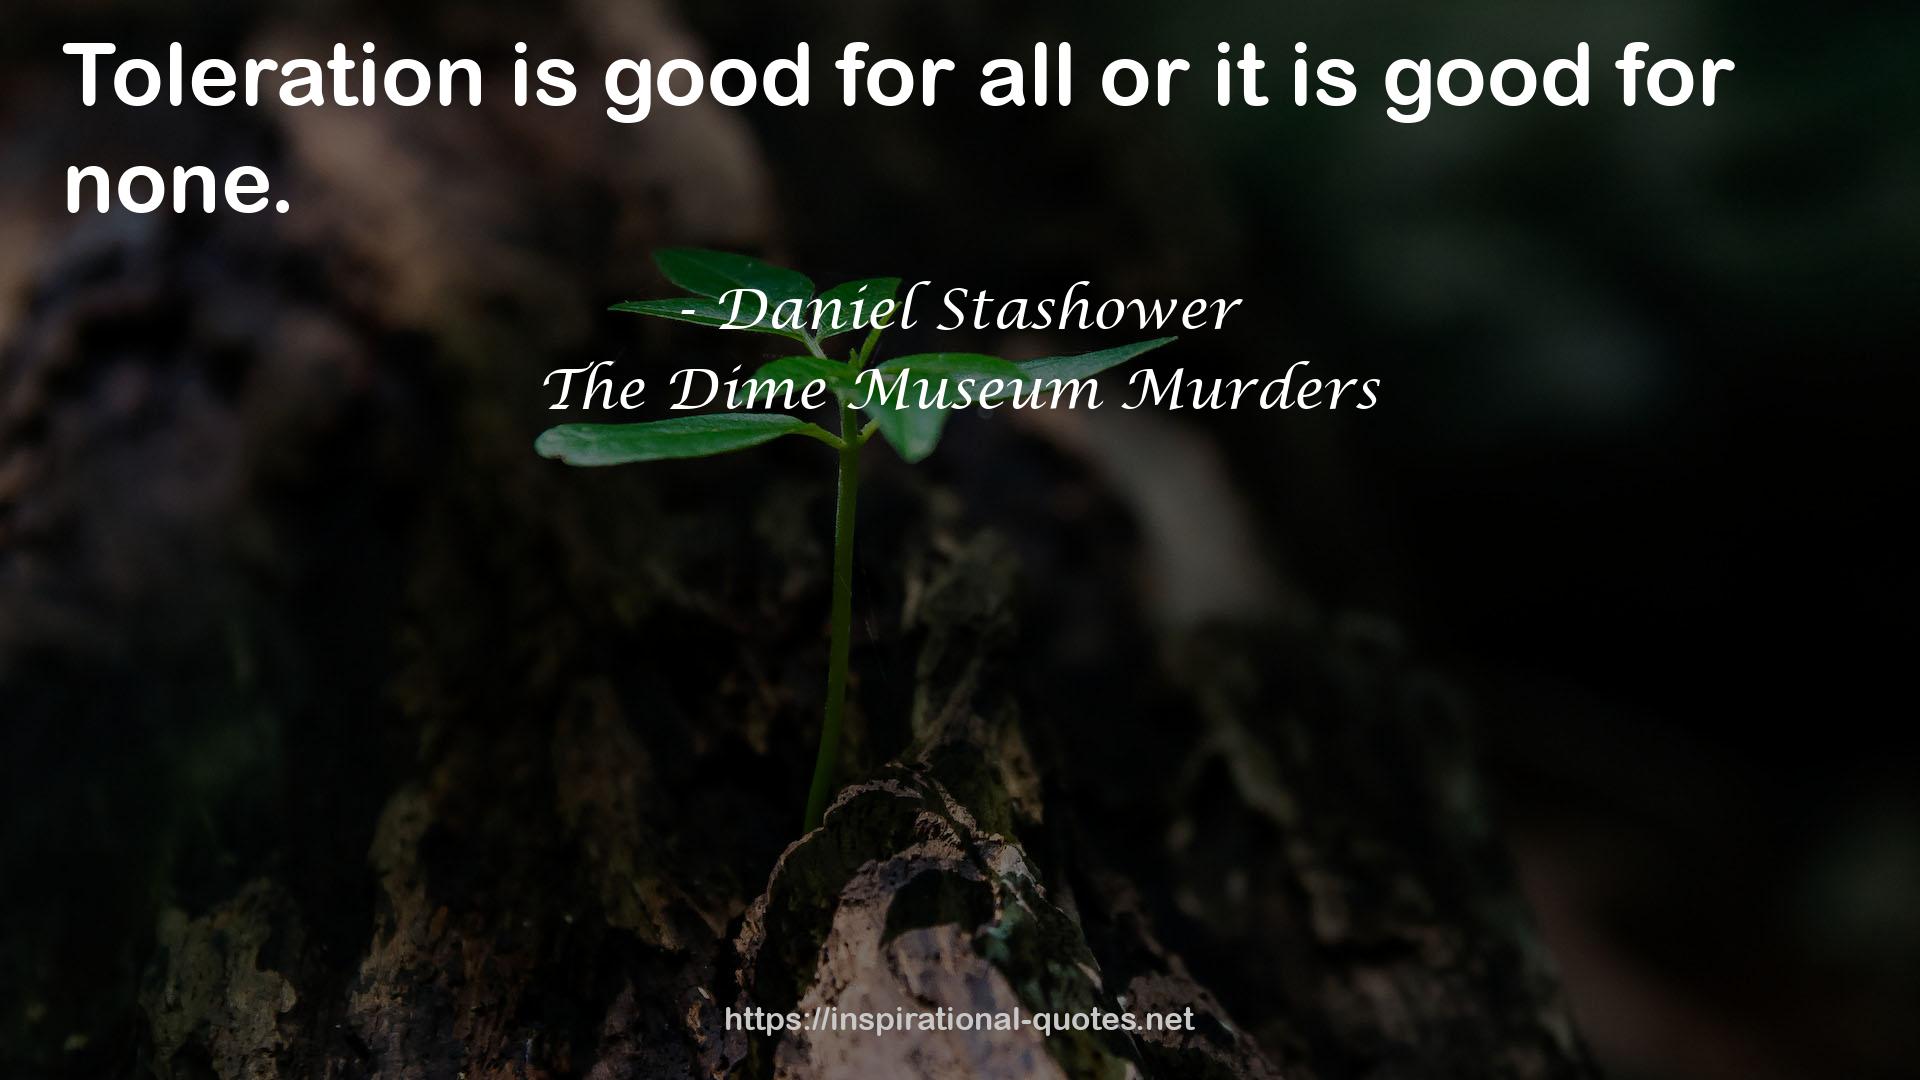 The Dime Museum Murders QUOTES